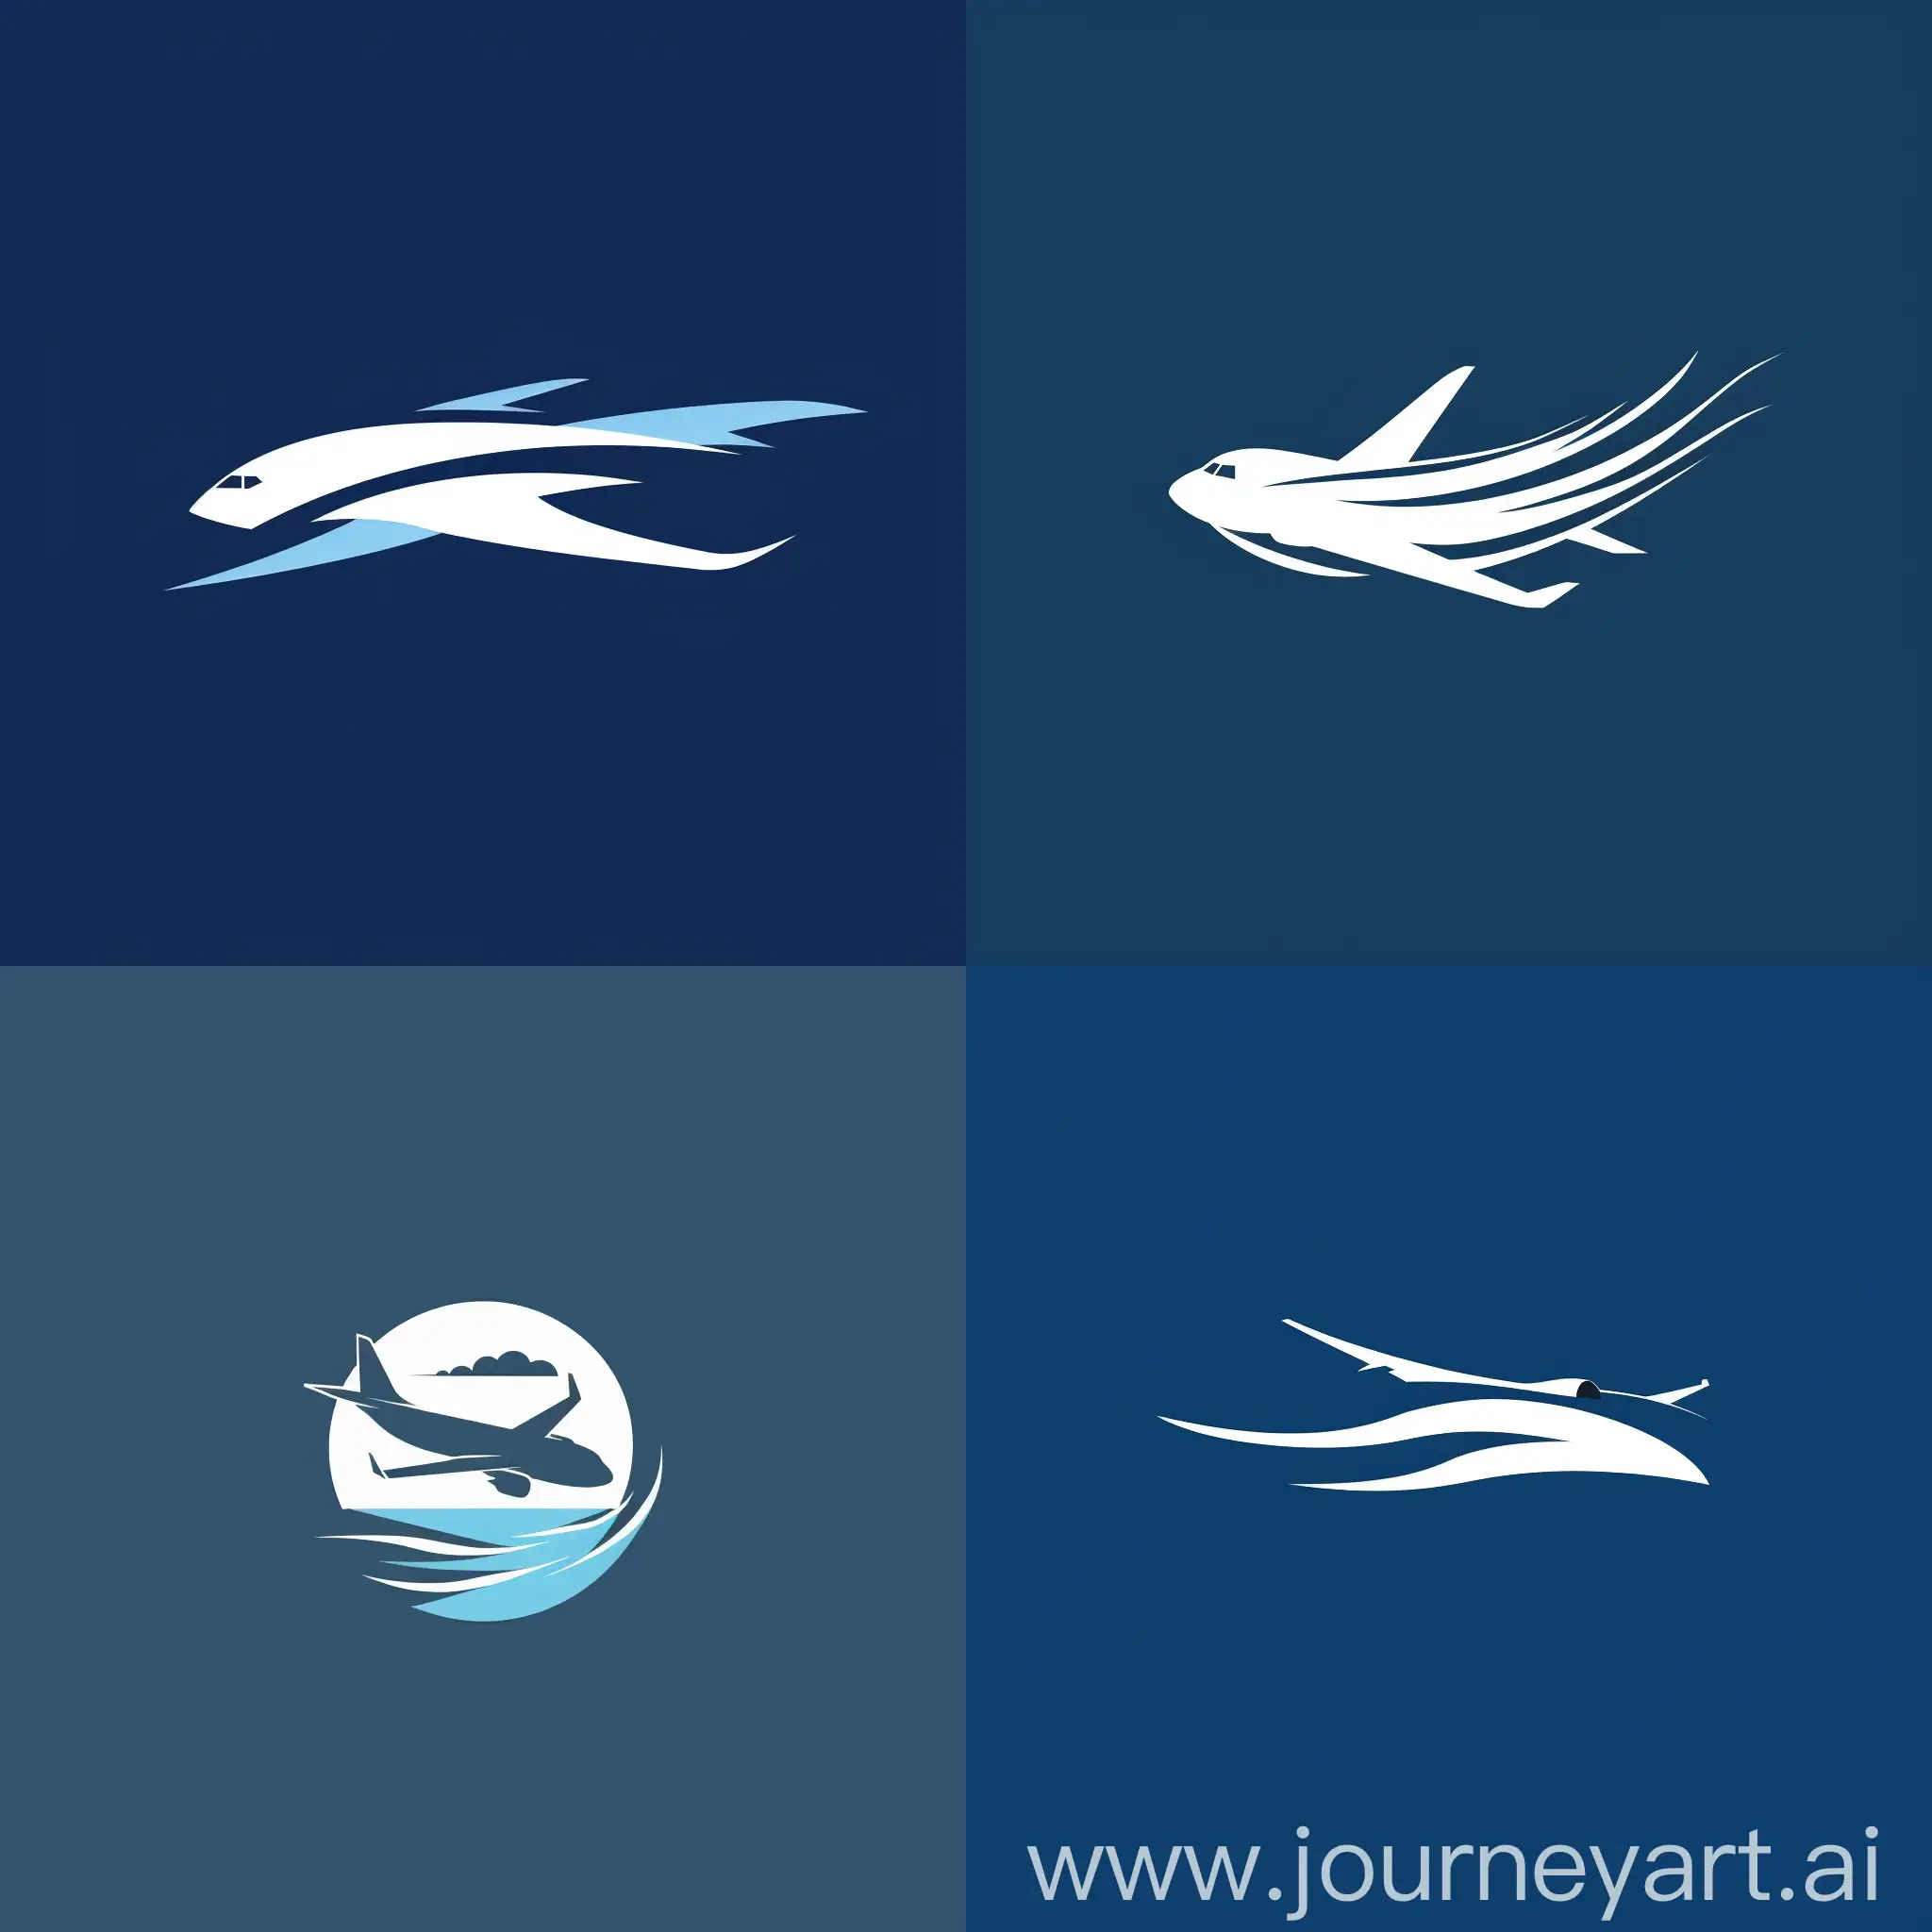 Airline-Company-Logo-with-Airplane-Silhouette-on-Horizon